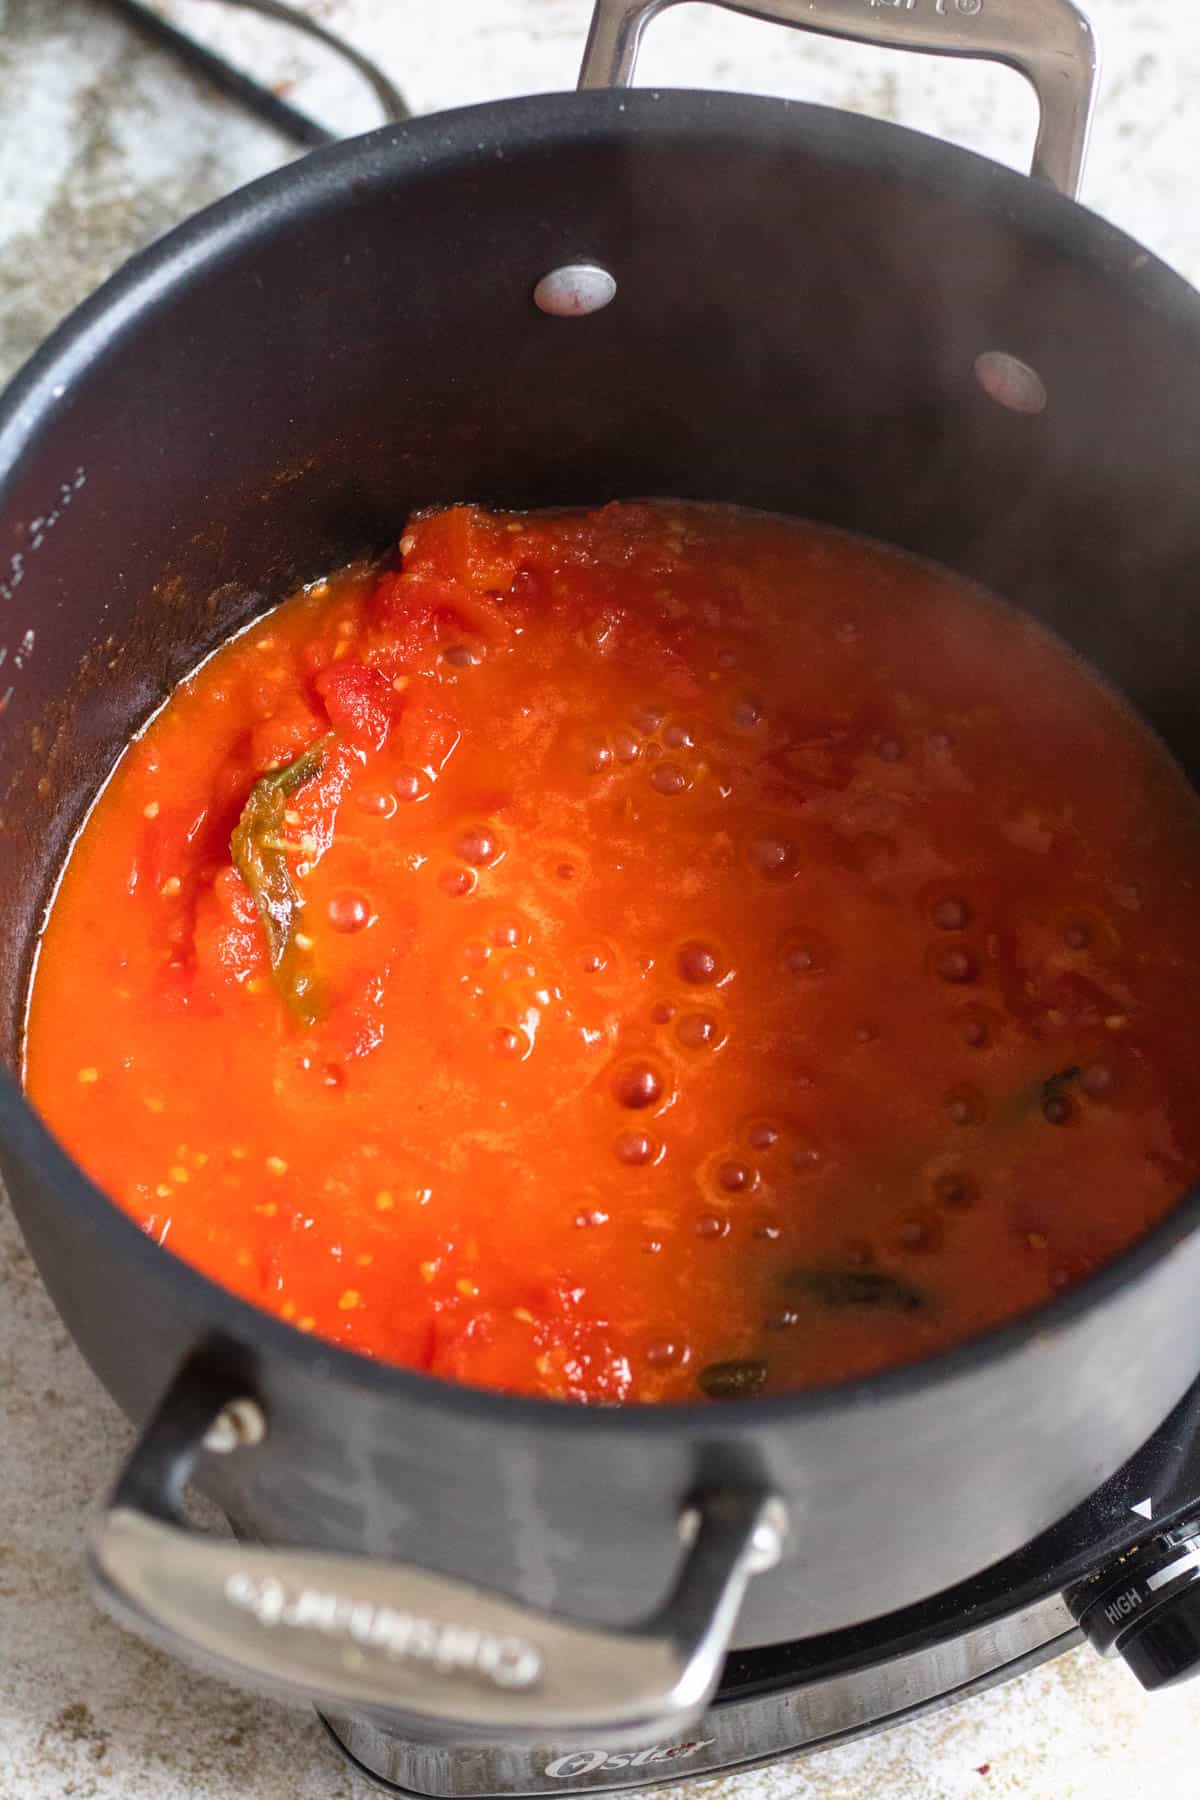 Tomatoes broken down and forming a sauce in the pot. 